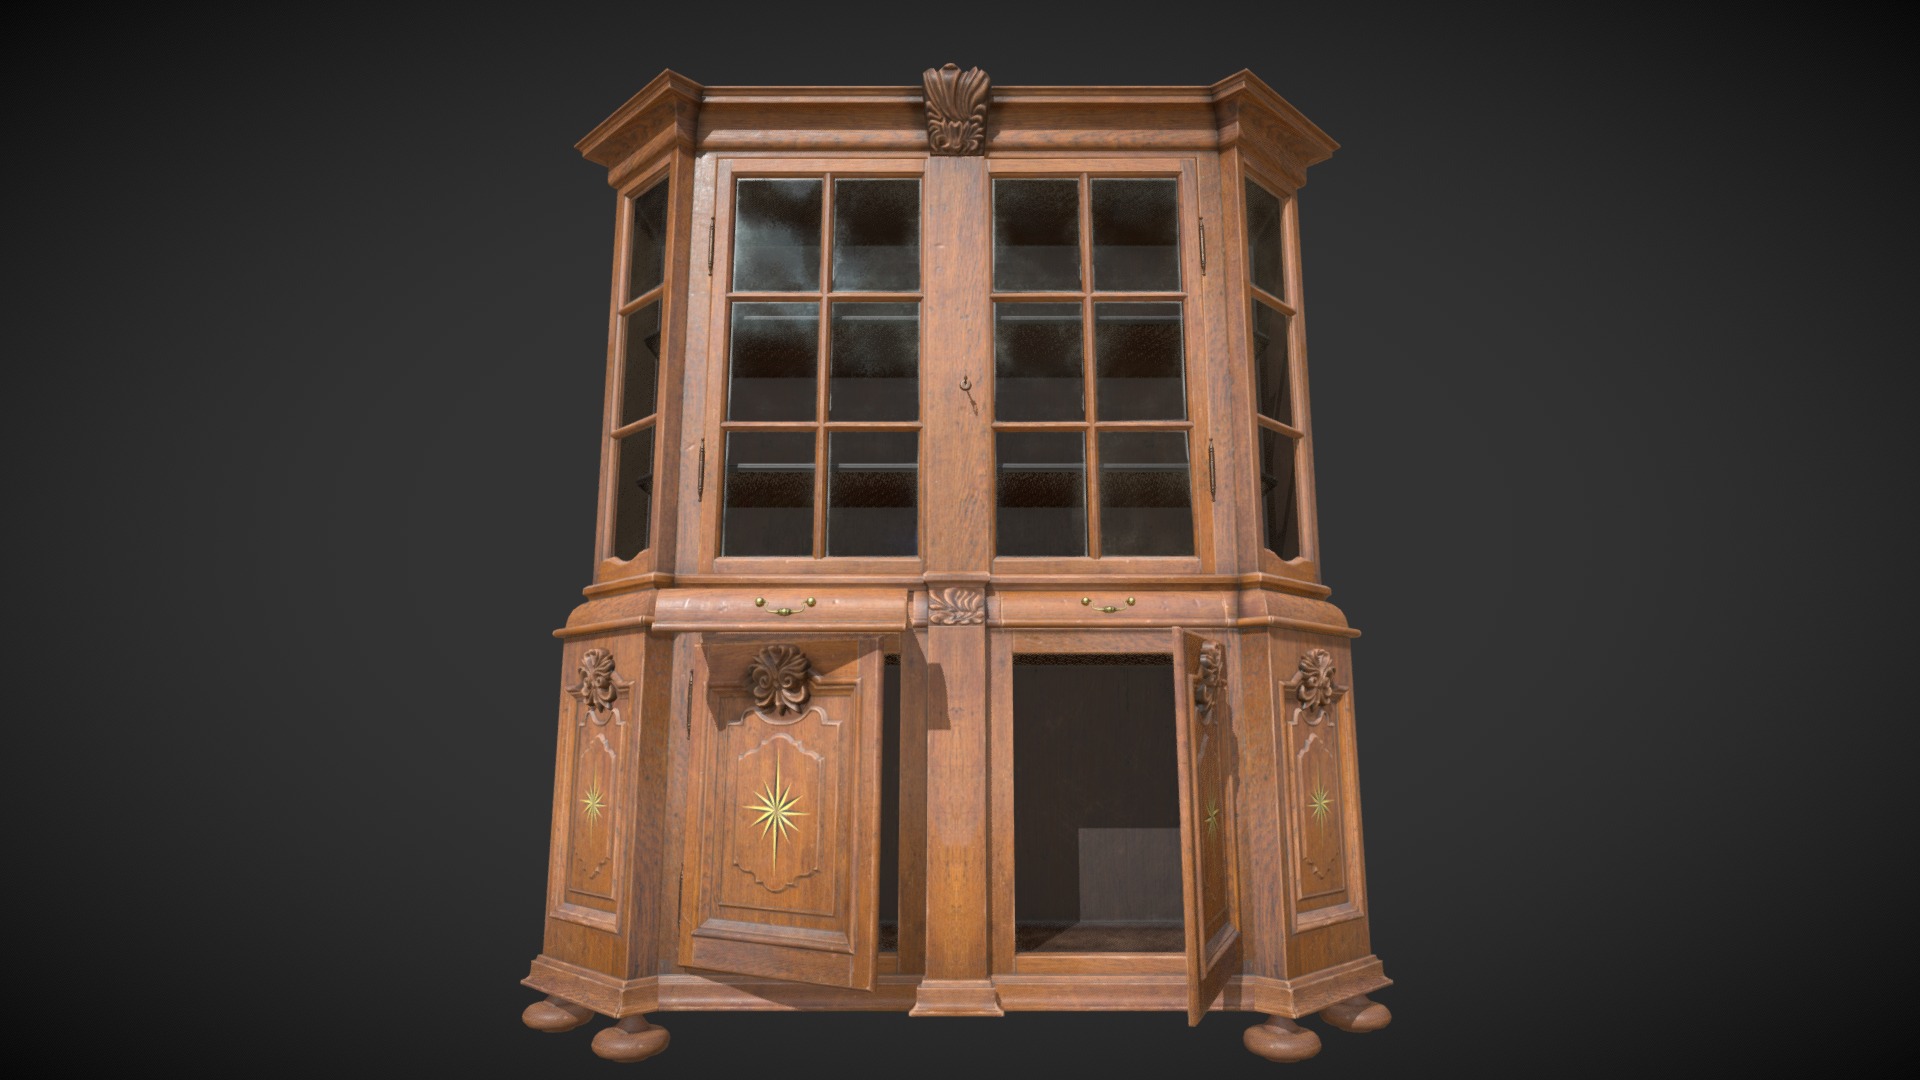 lowpoly game model with PBR
2048 texture - Display Cupboard - 3D model by J.Seok Lee (@sonaki82) 3d model